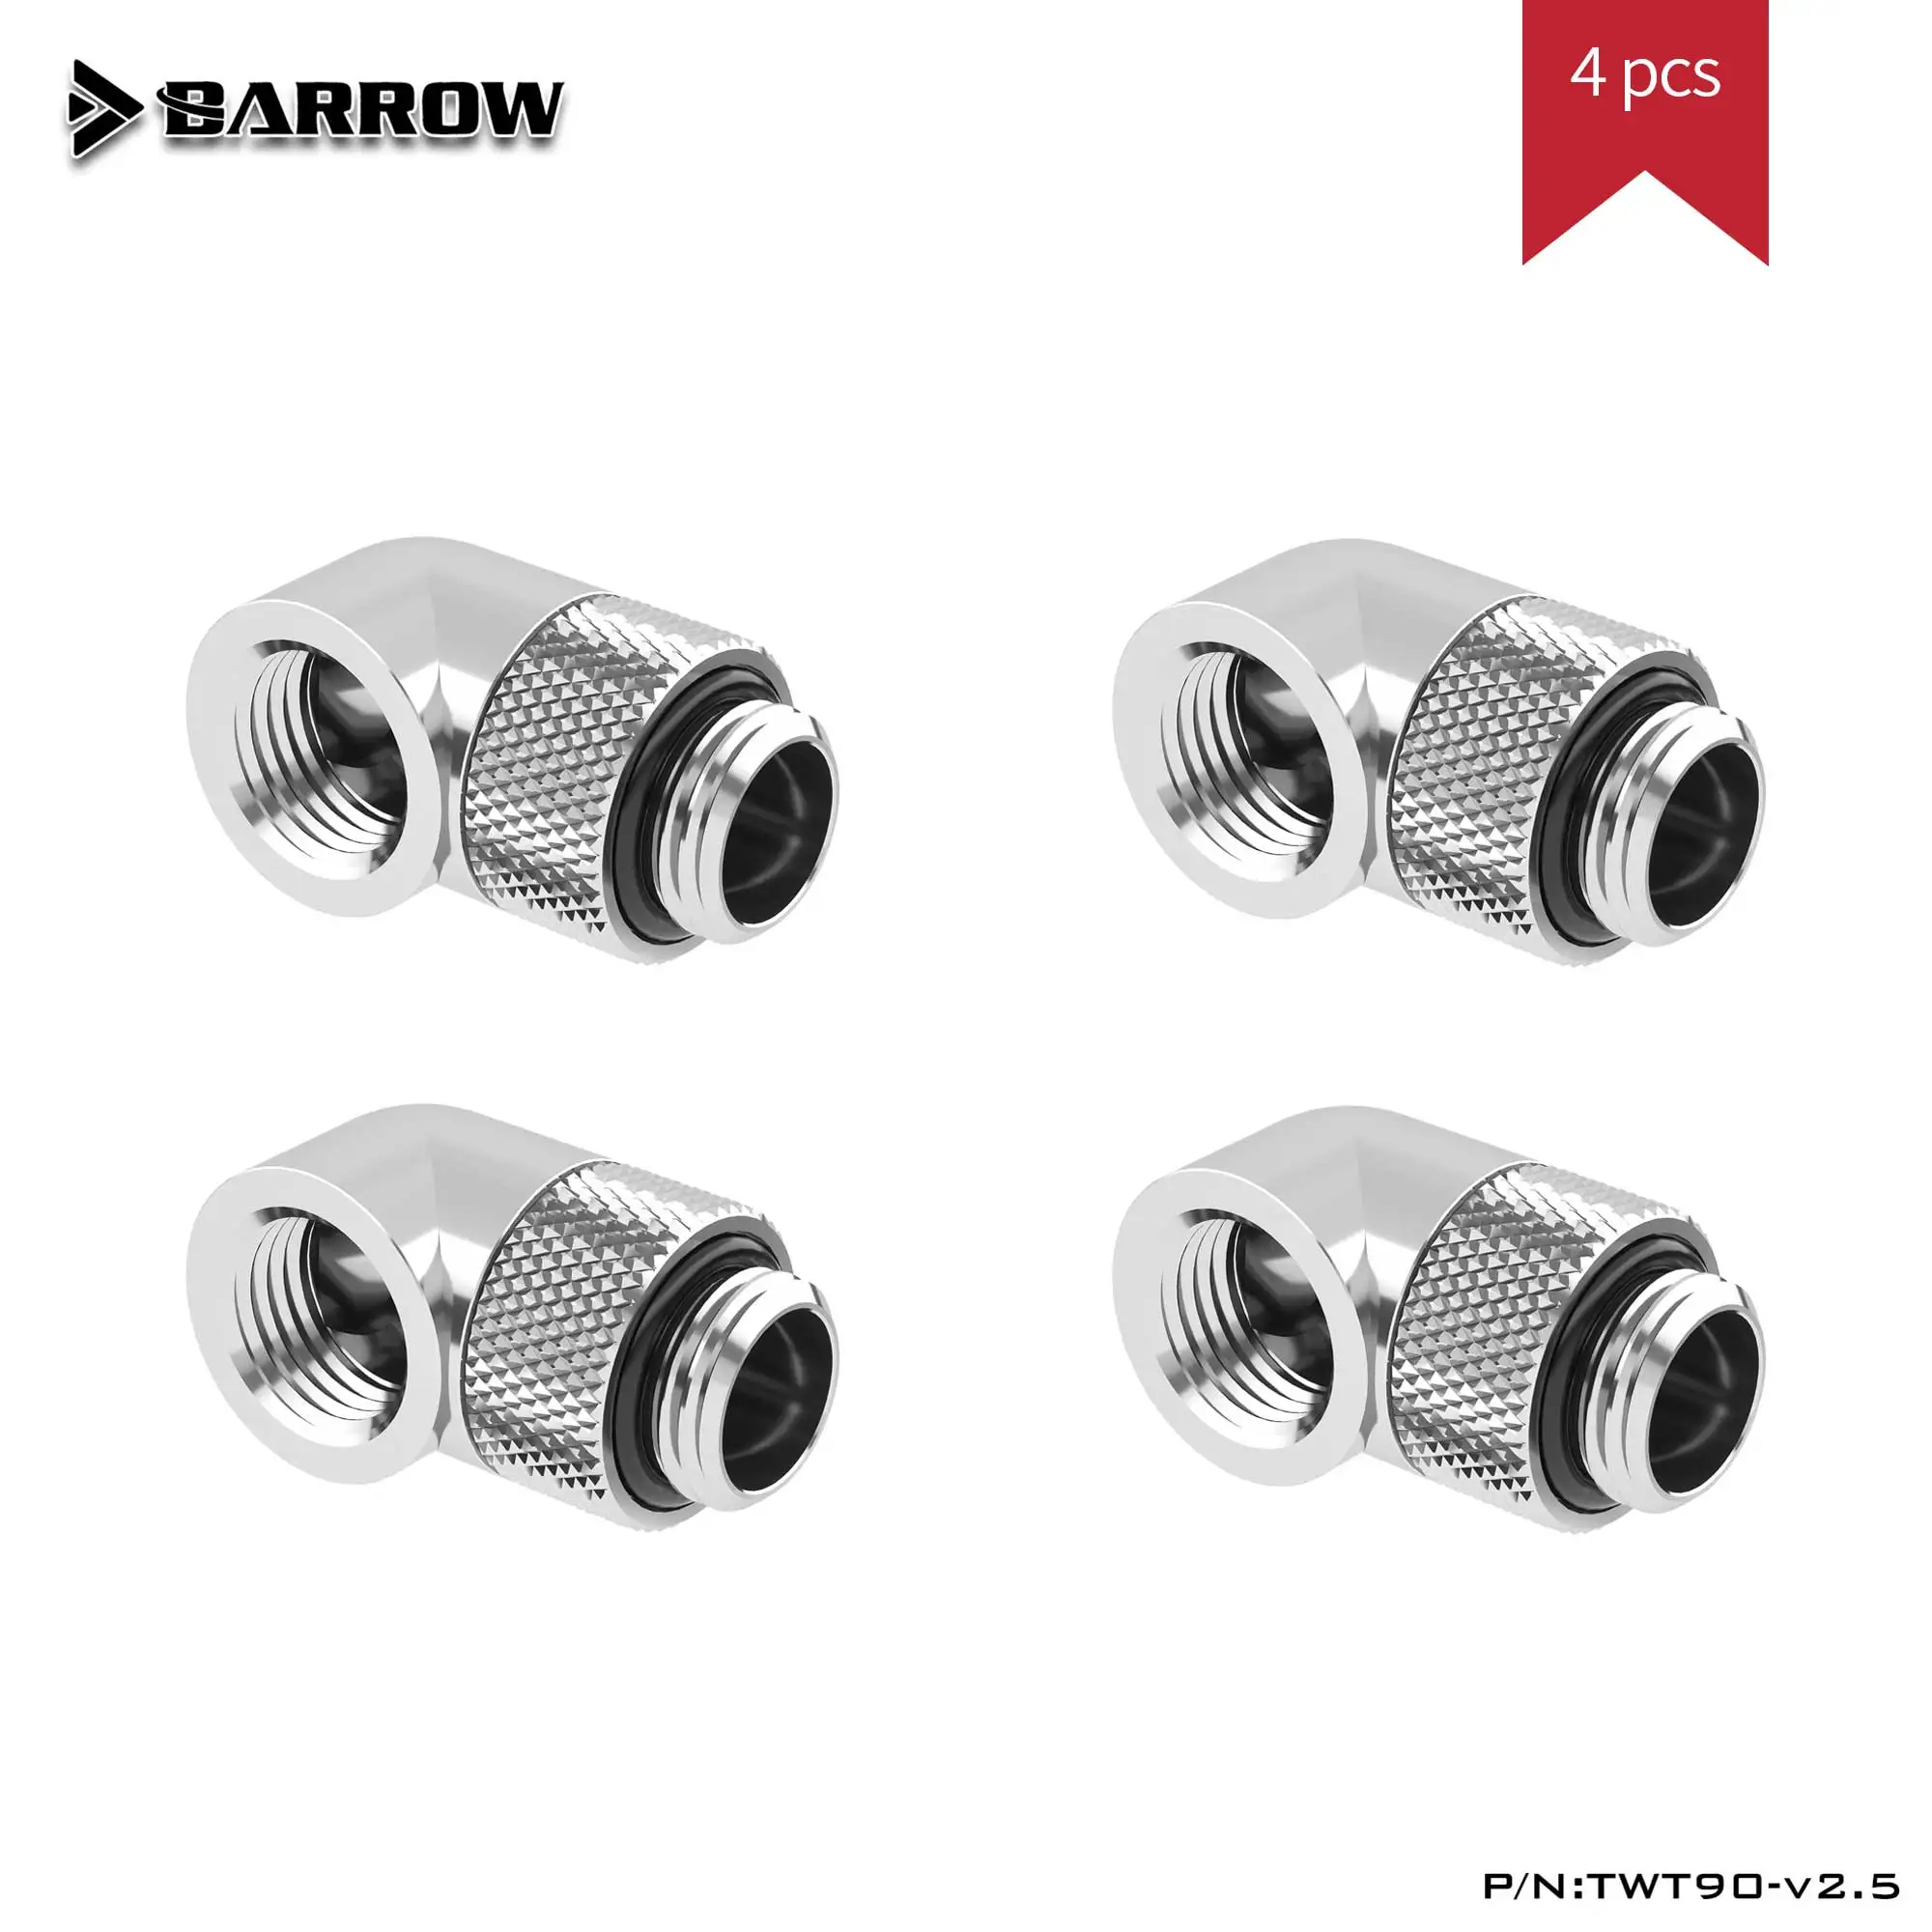 

BARROW TWT90-v2.5 4pcs G1/4 Water Cooling Adaptor Thread 90 Degree Rotary Fitting Adapter Rotating 90 degrees Gold Black Silver